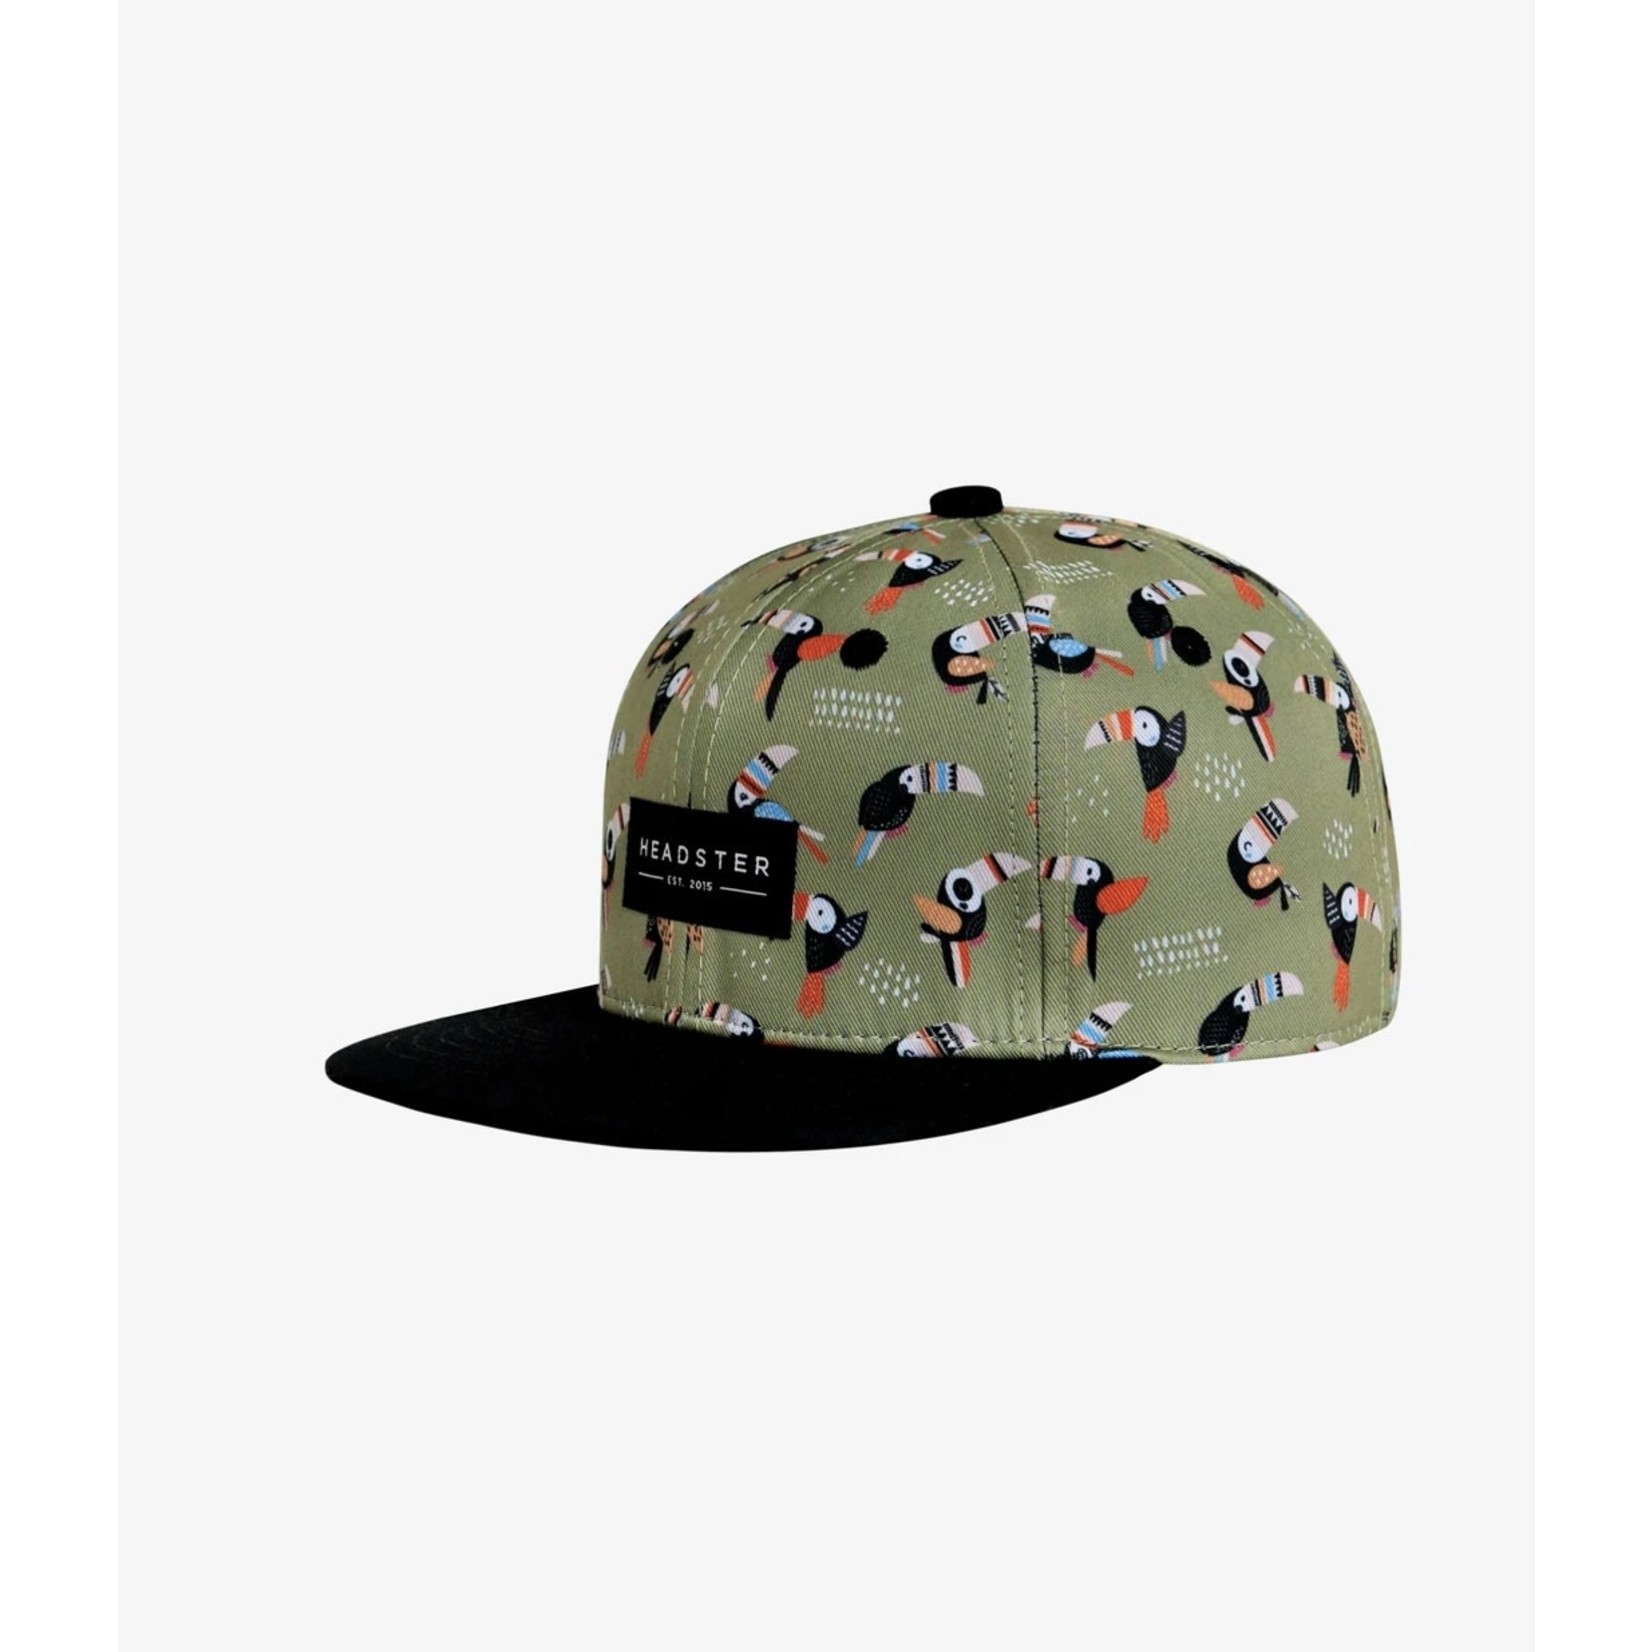 Headster Headster - Crazy Toucan Snapback